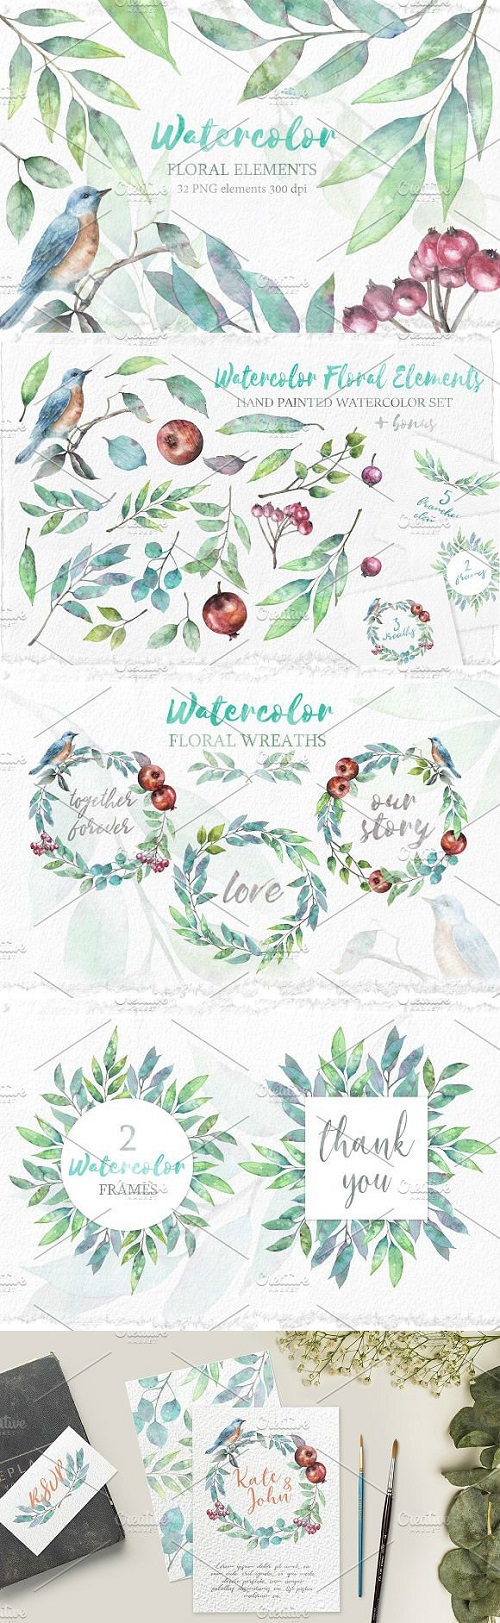 Watercolor floral collection 2160726